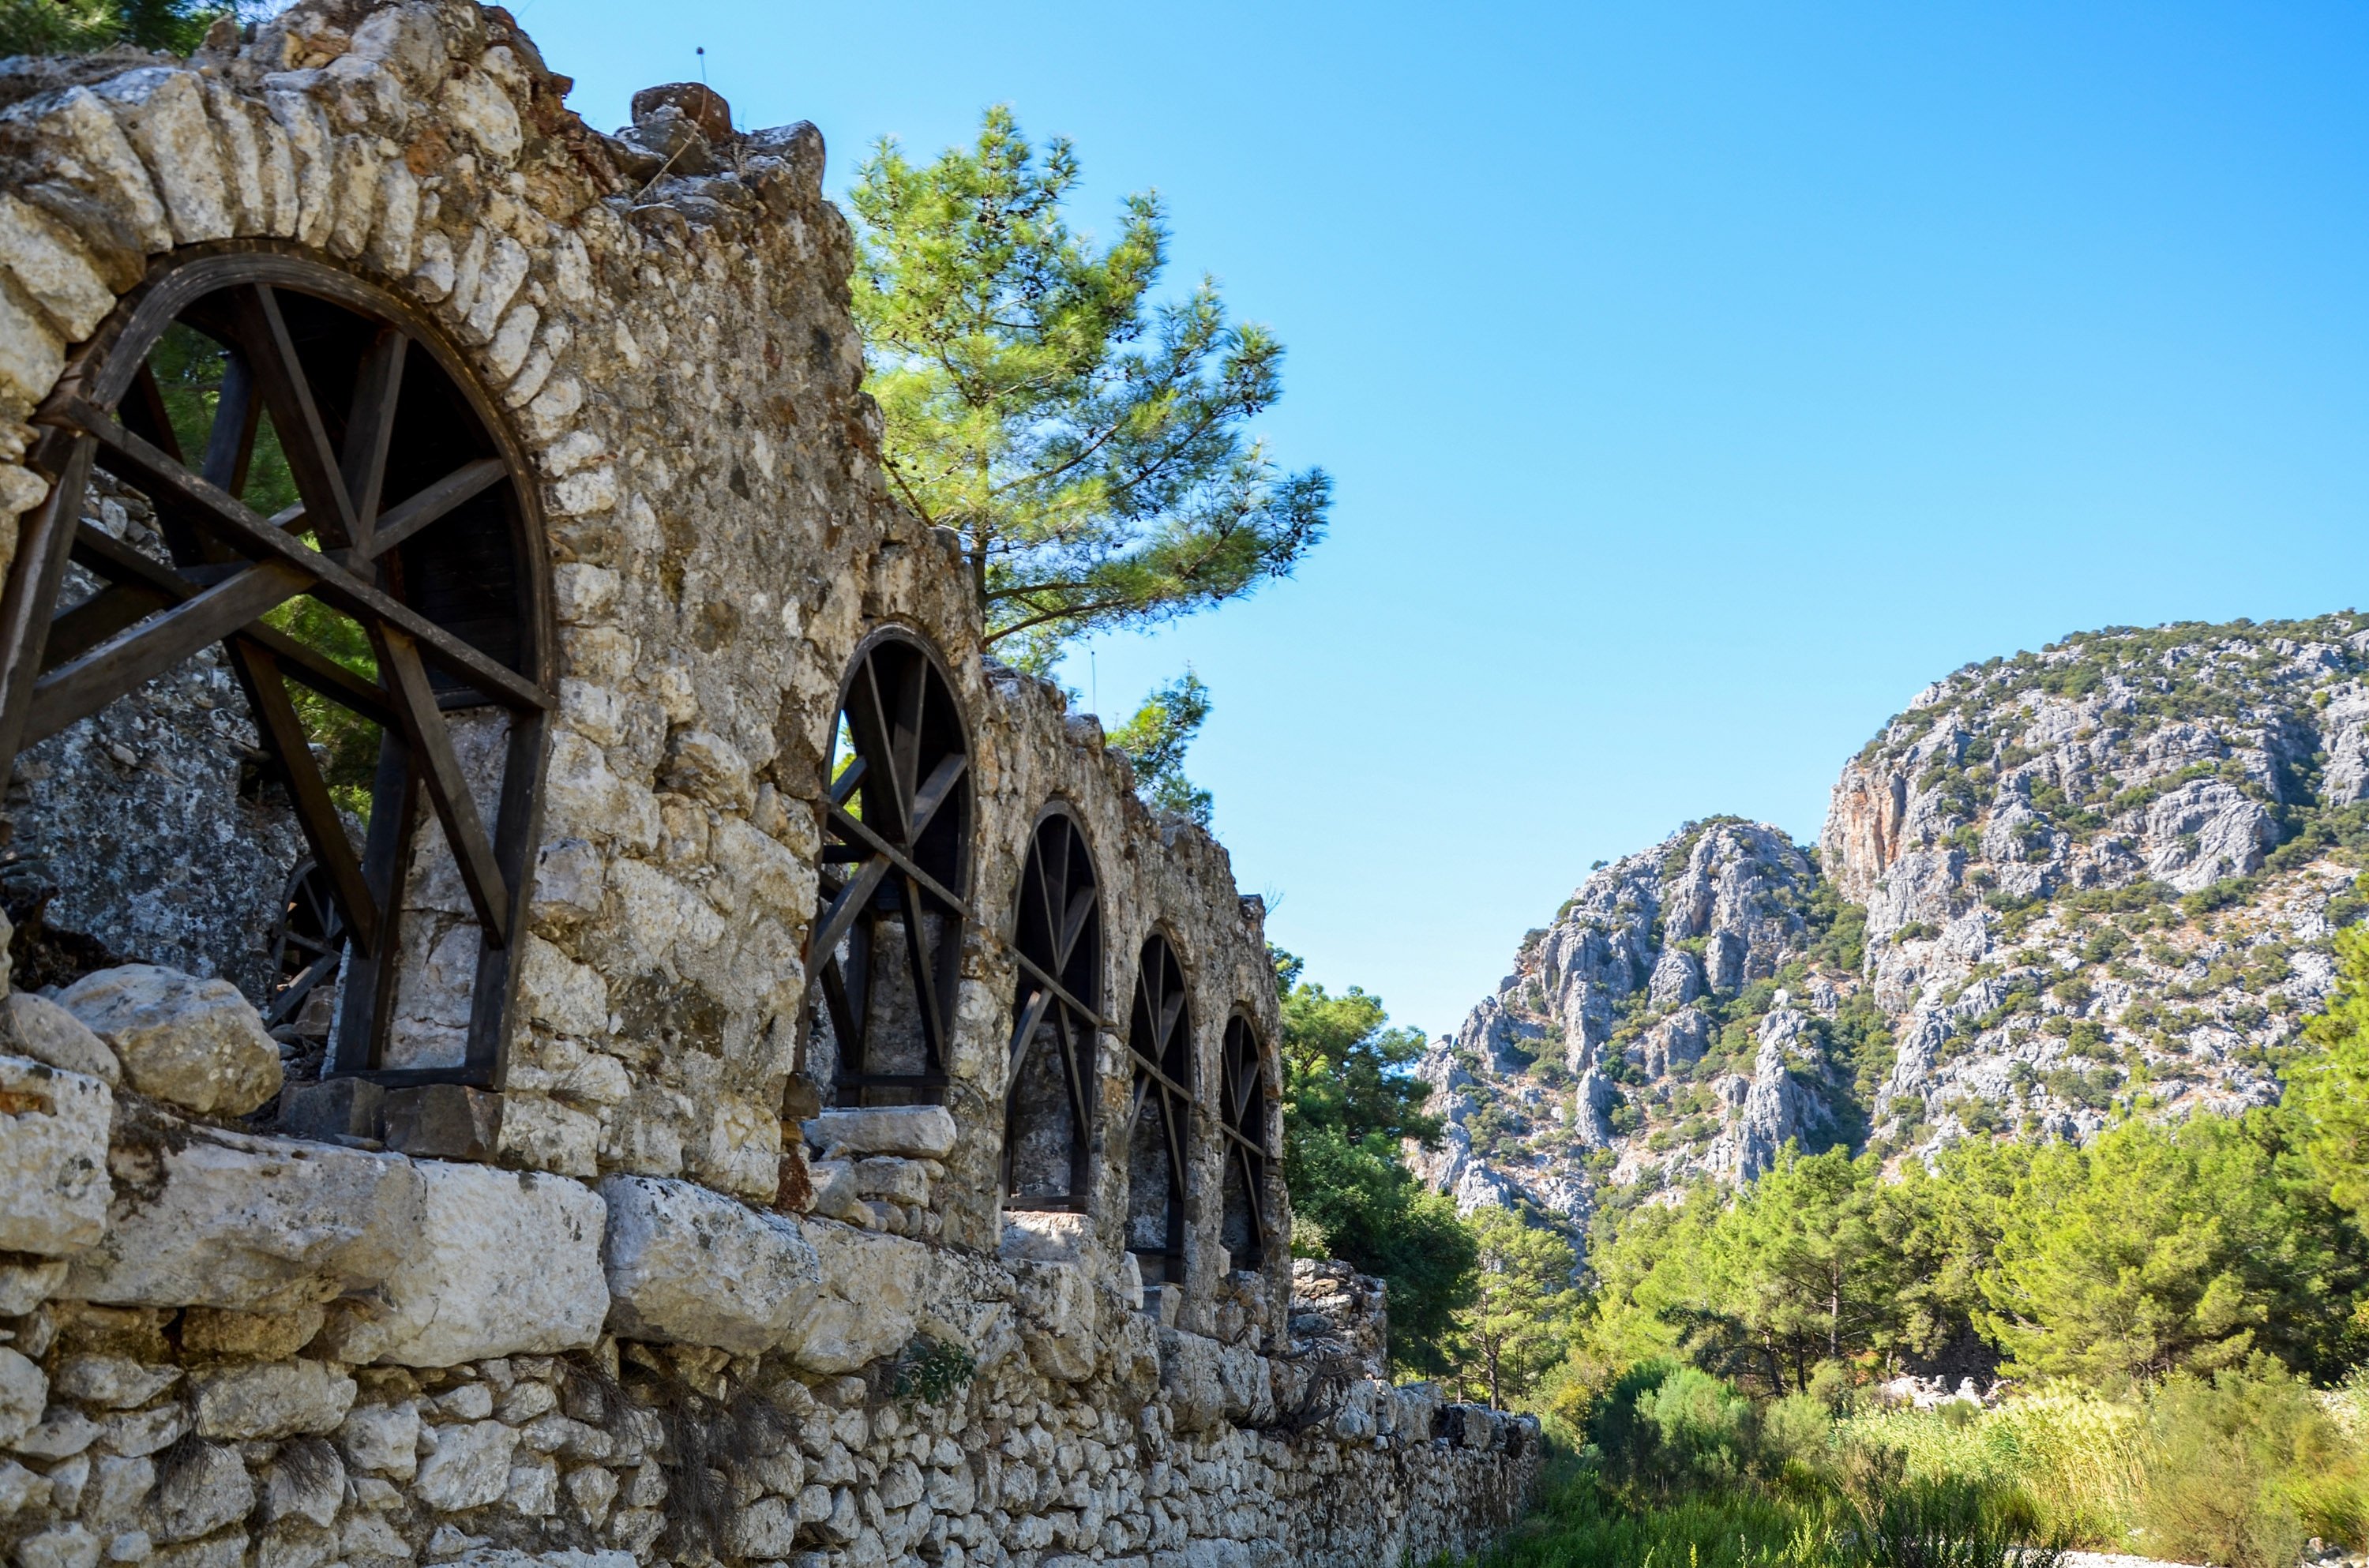 Ruins of stone walls of the ancient city Olympos in Çıralı, Antalya along the Lycian Way on the Mediterranean coast. (Shutterstock Photo)